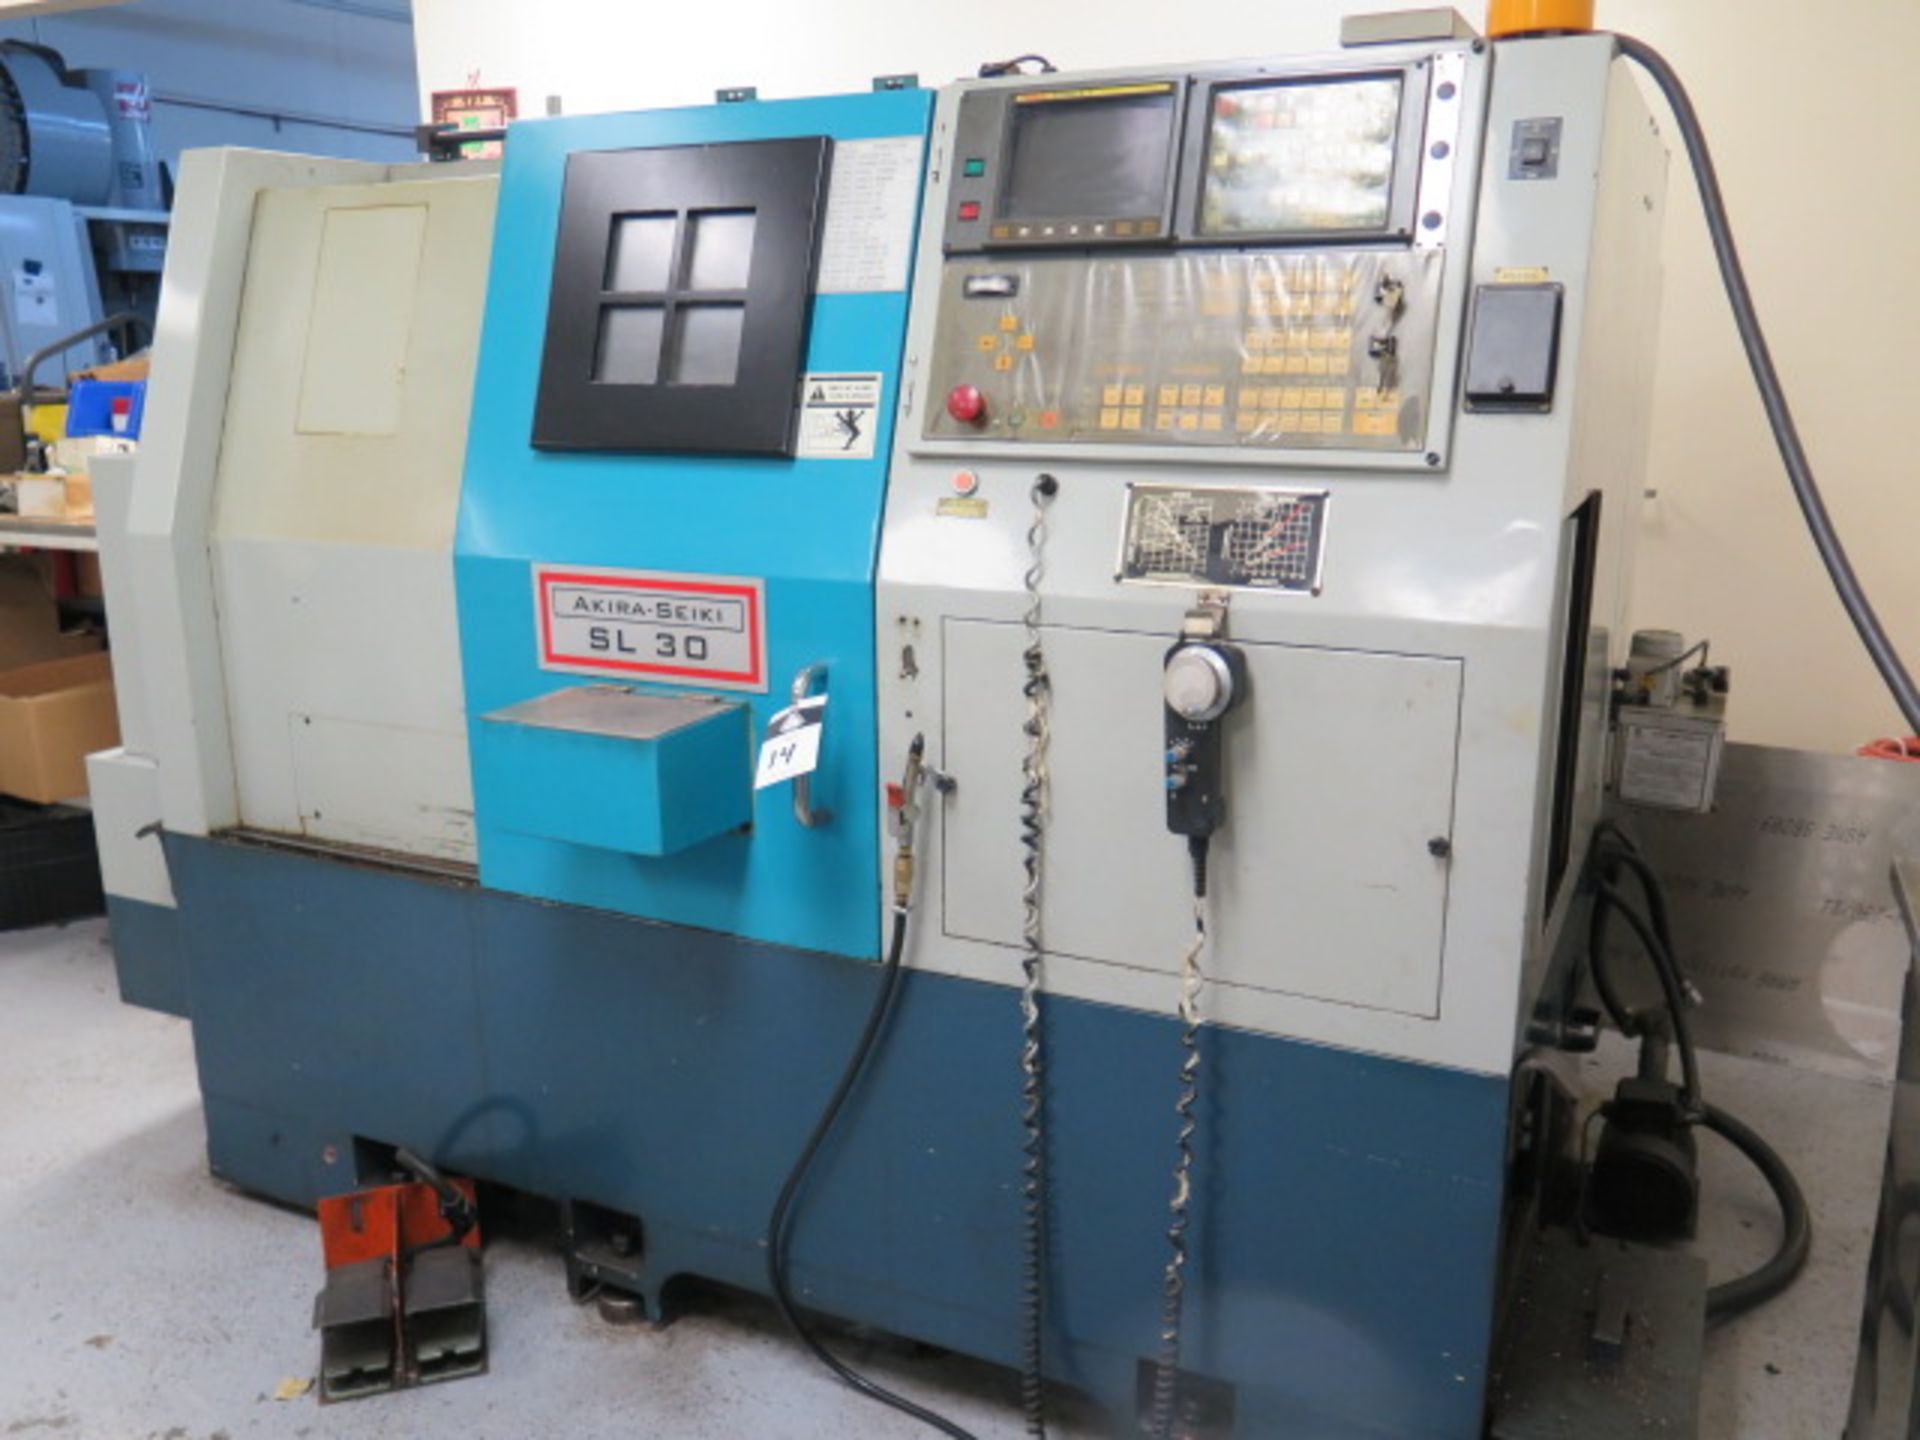 1999 Akira Seiki SL30 CNC Turning Center s/n 99TD105-056 w/ Fanuc Series 0-T Controls, SOLD AS IS - Image 2 of 14